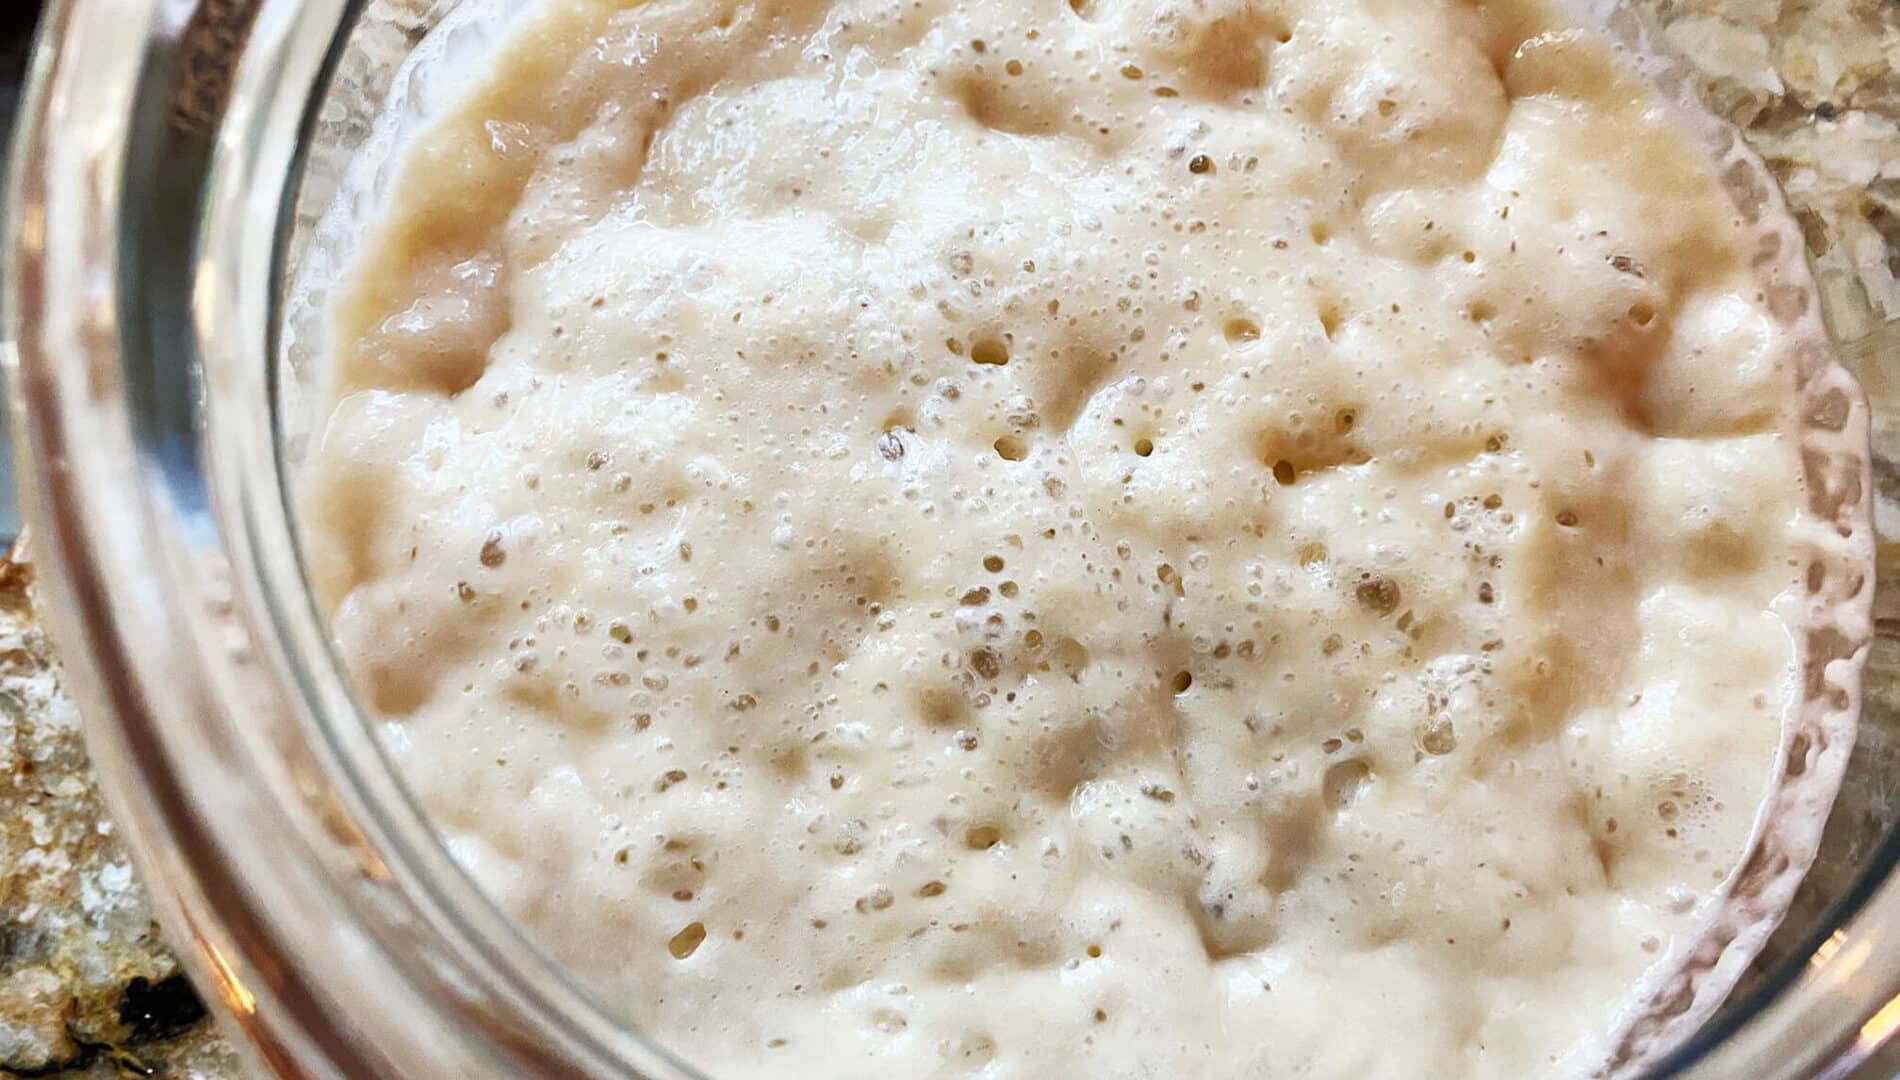 White bubbly fermenting liquid commonly known as sourdough starter